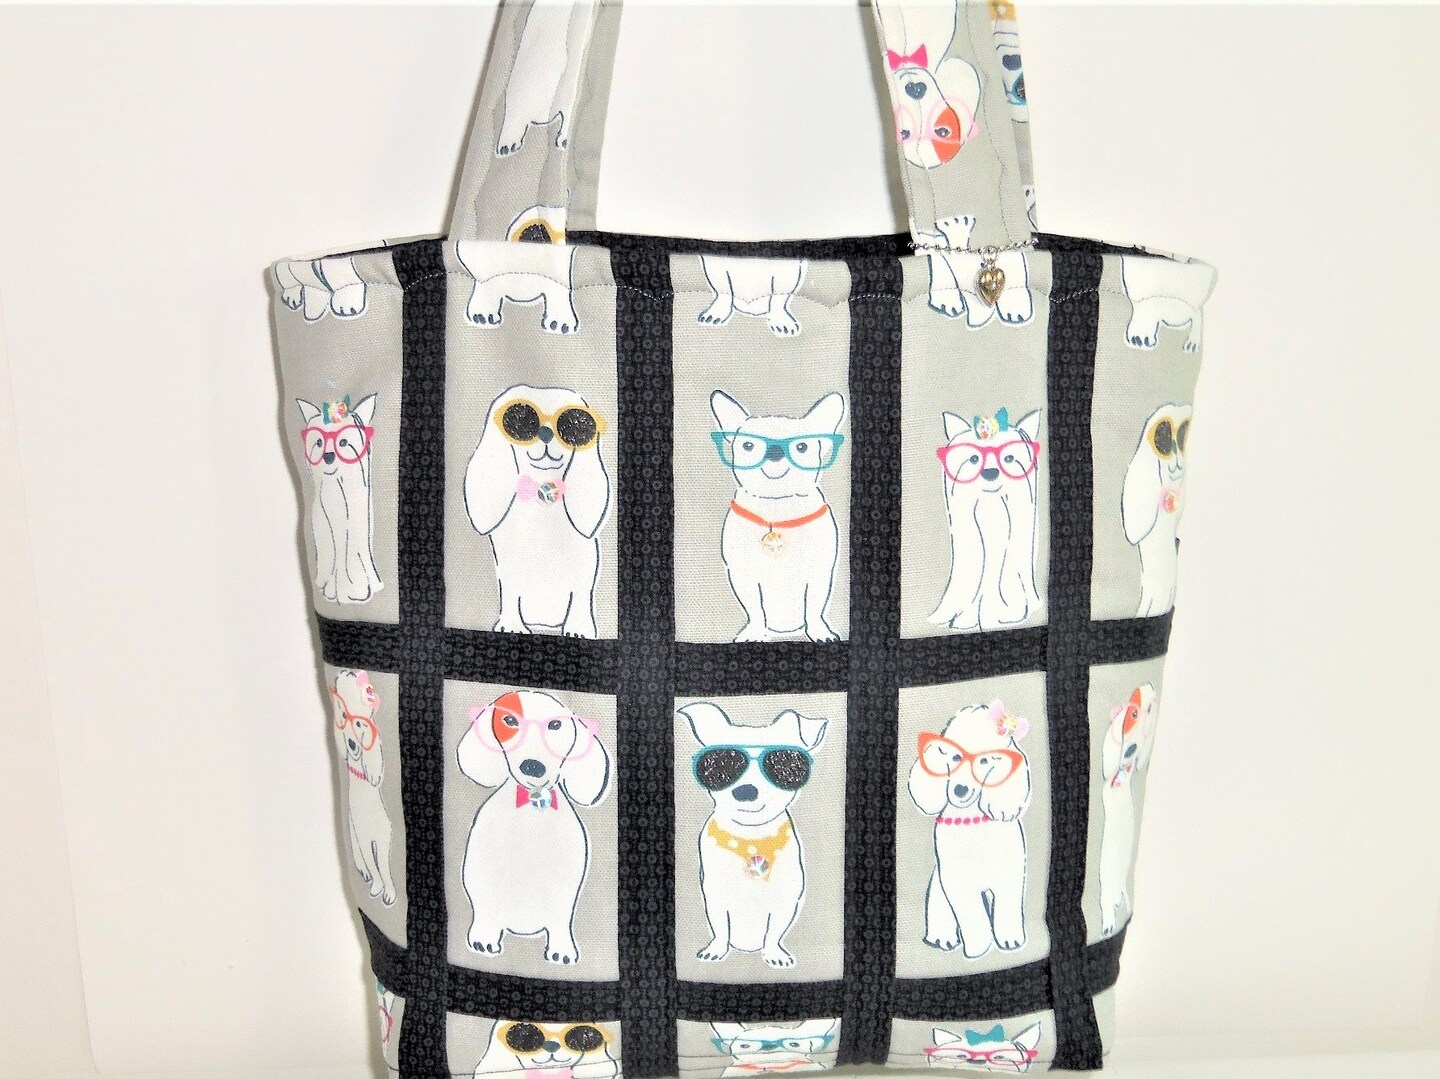 Lux Canvas Tote, Crystal Hand Bag, Purse, Tote Bag, Dog Tote Bag, Quilted  Tote Bag, Applique Tote, Gray Crystal Tote, Sewnsewsister, Handbags &  Purses